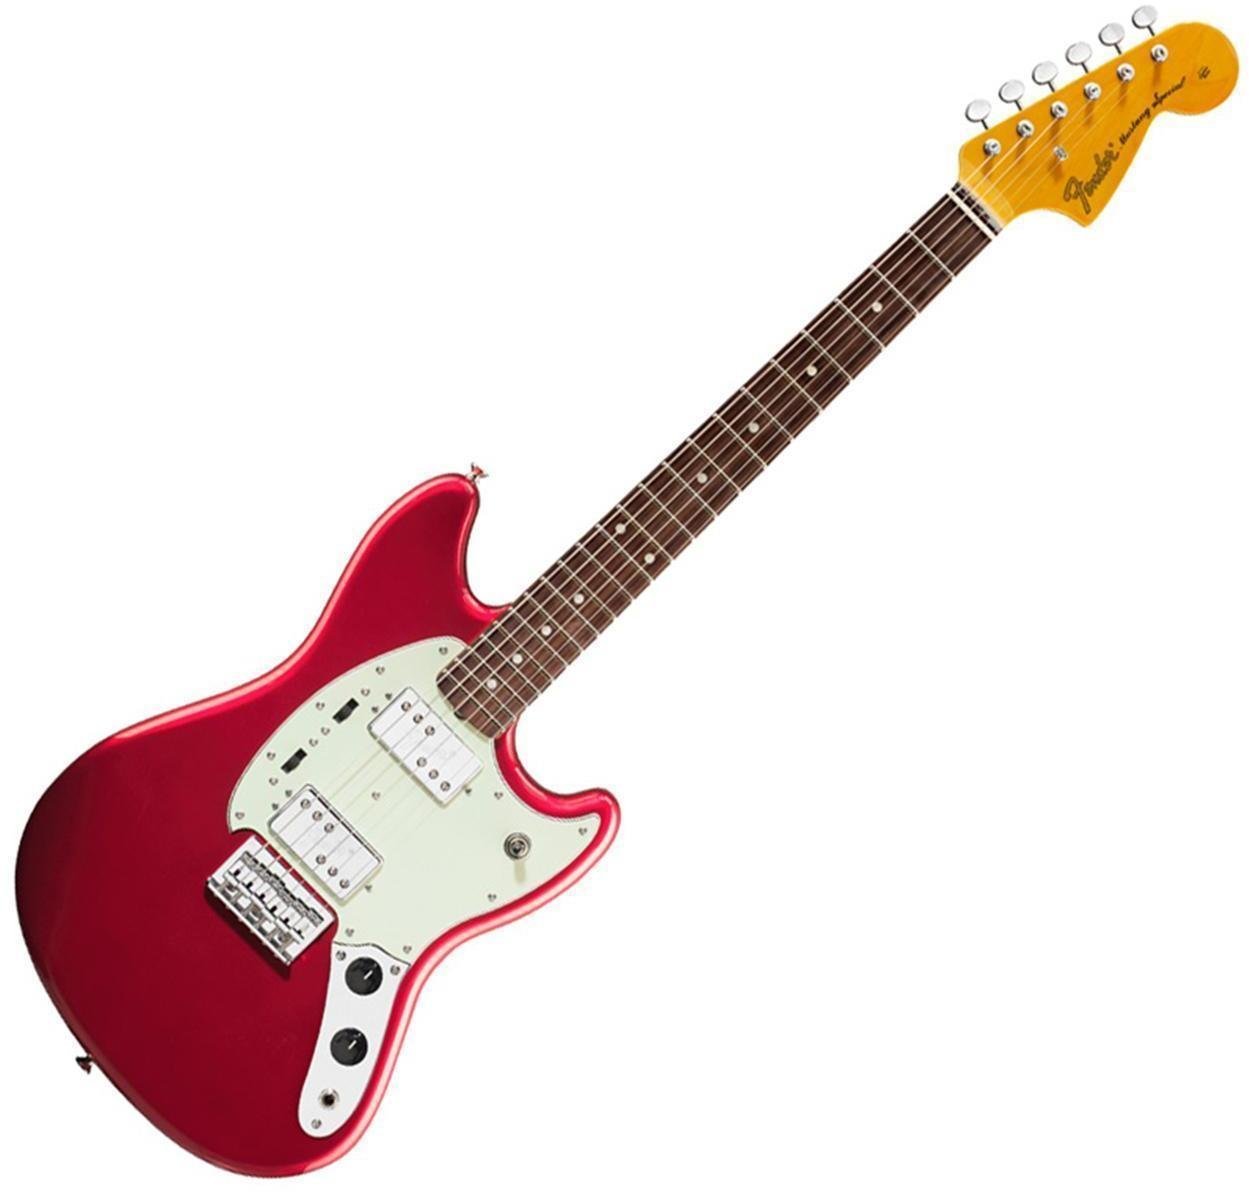 Sähkökitara Fender Pawn Shop Mustang Special, Rosewood Fingerboard, Candy Apple Red